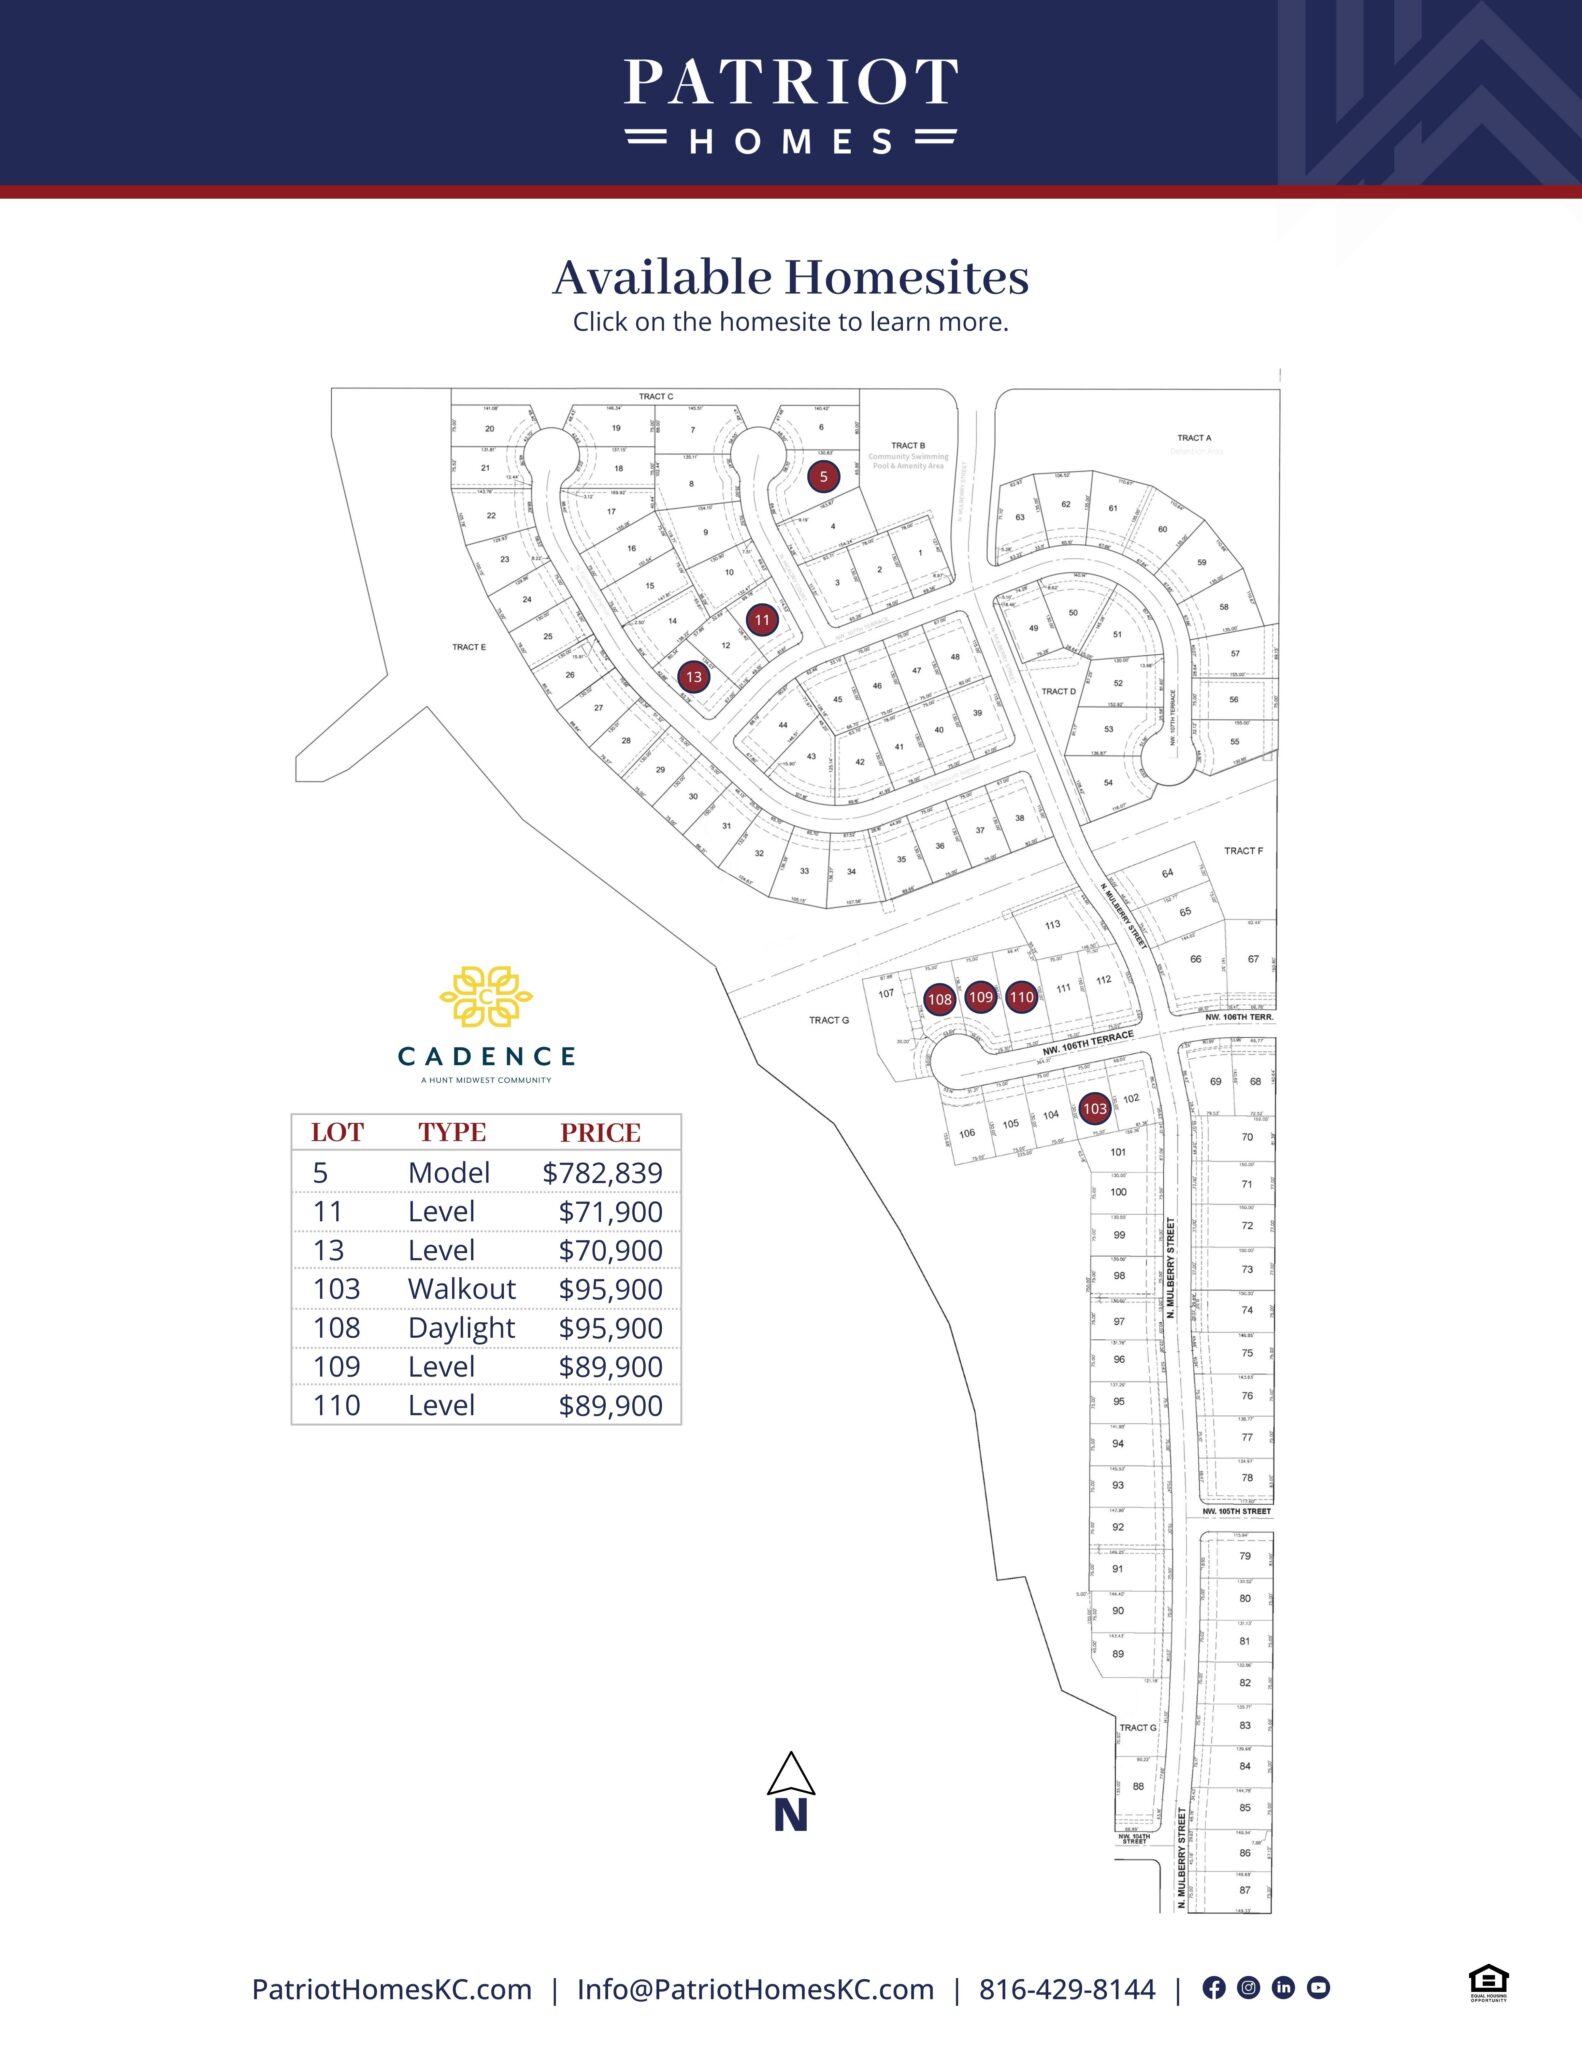 Available homesites lots in Cadence new home community.